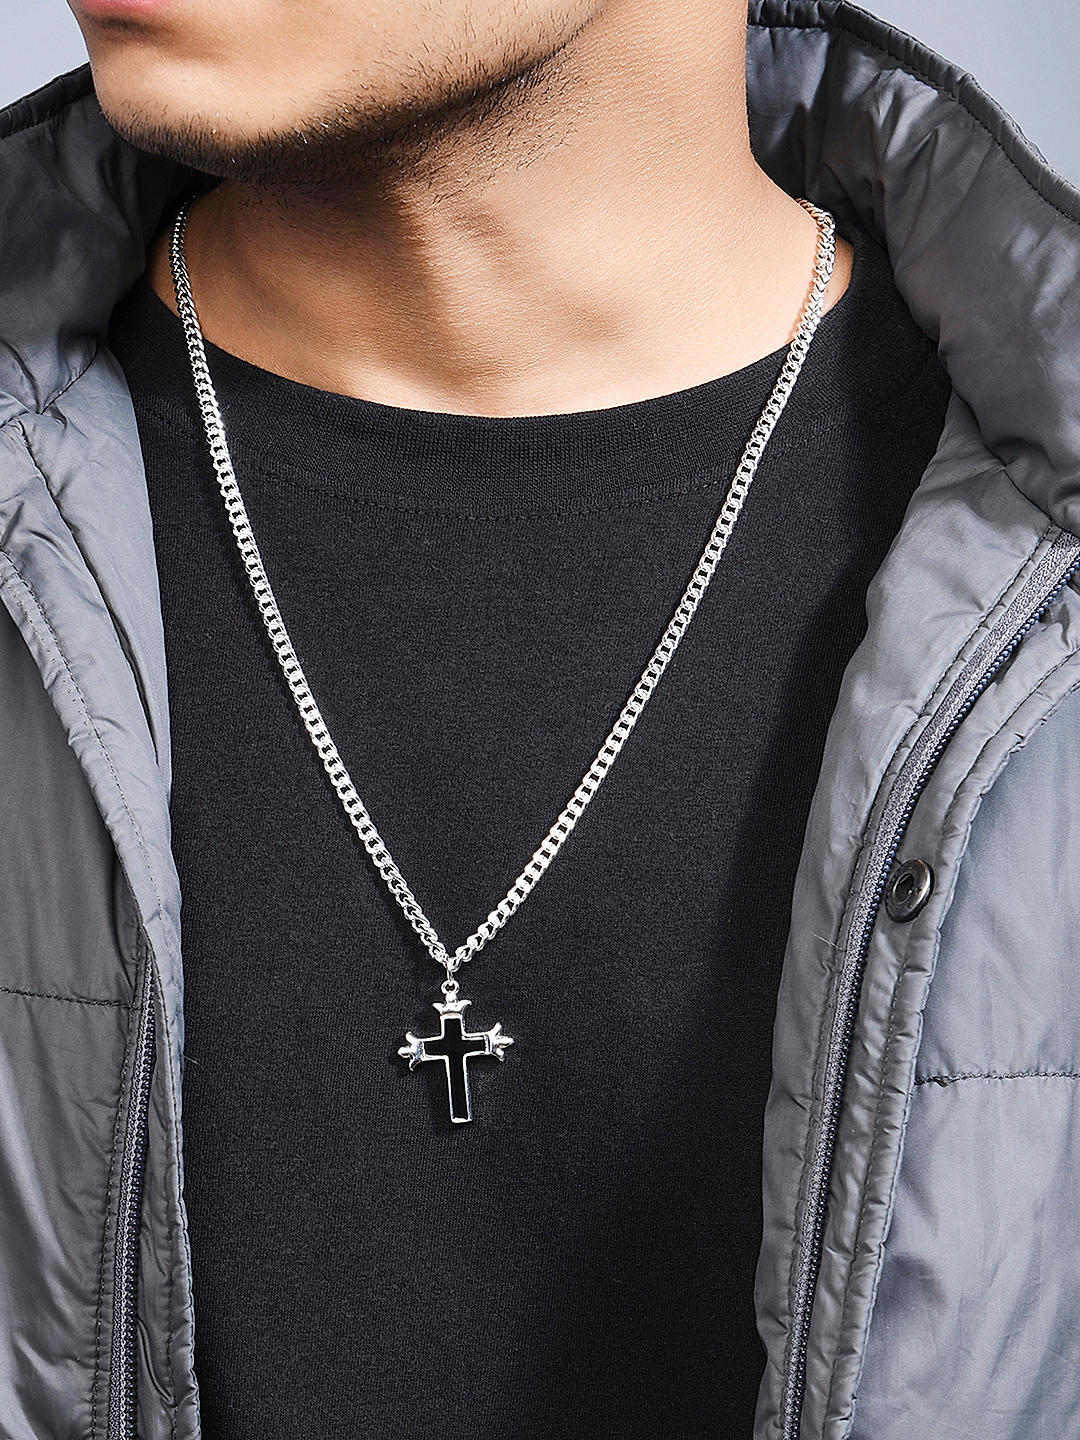 Cross Cremation Pendant Black Rhodium over Sterling Silver with Black Onyx  - Treasured Memories